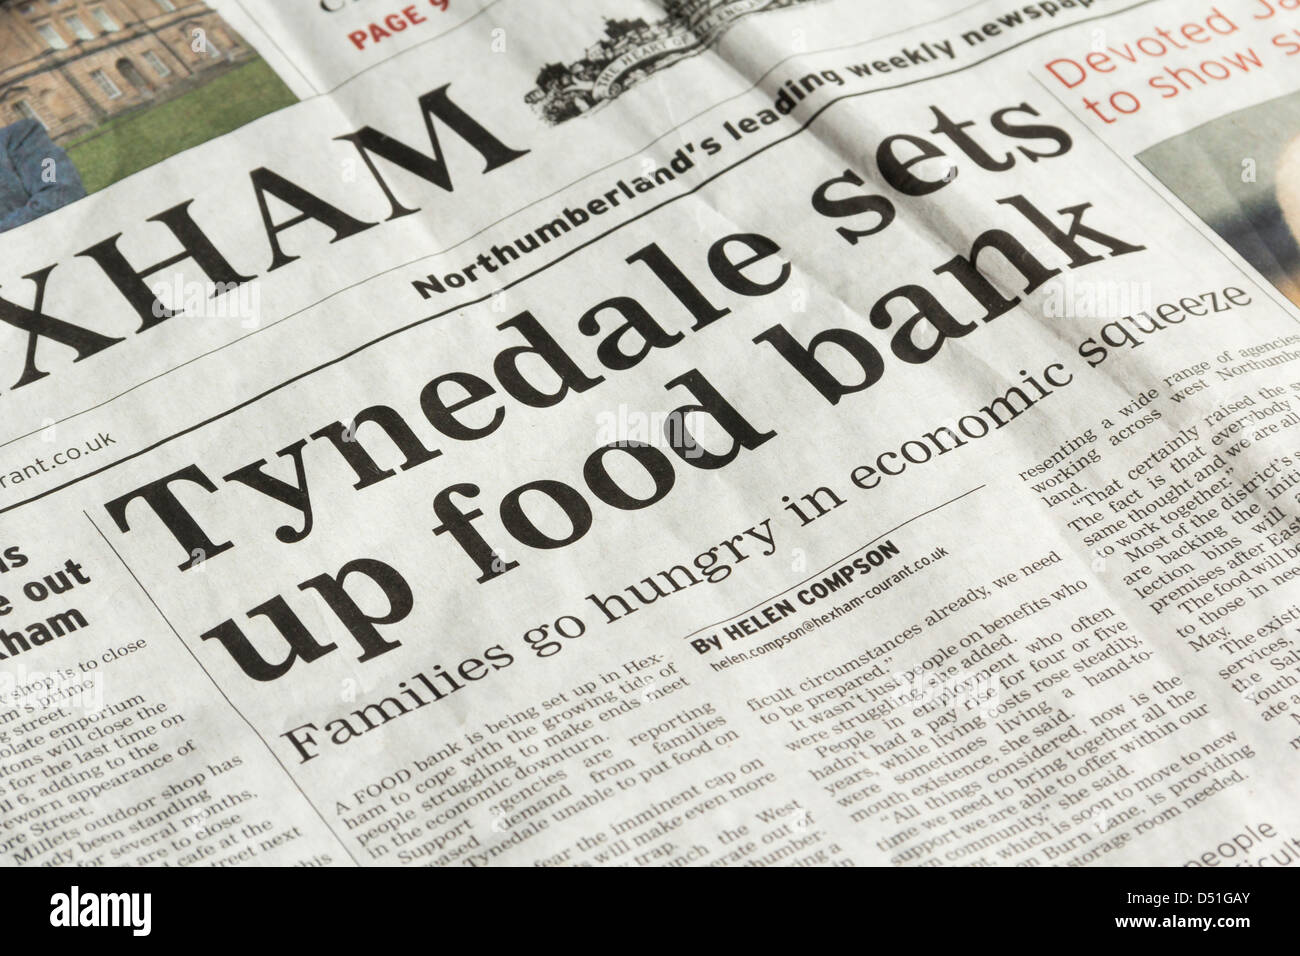 Headline on the setting up of a  food bank in Tynedale, Northumberland on the front page of the Hexham Courant newspaper. Stock Photo